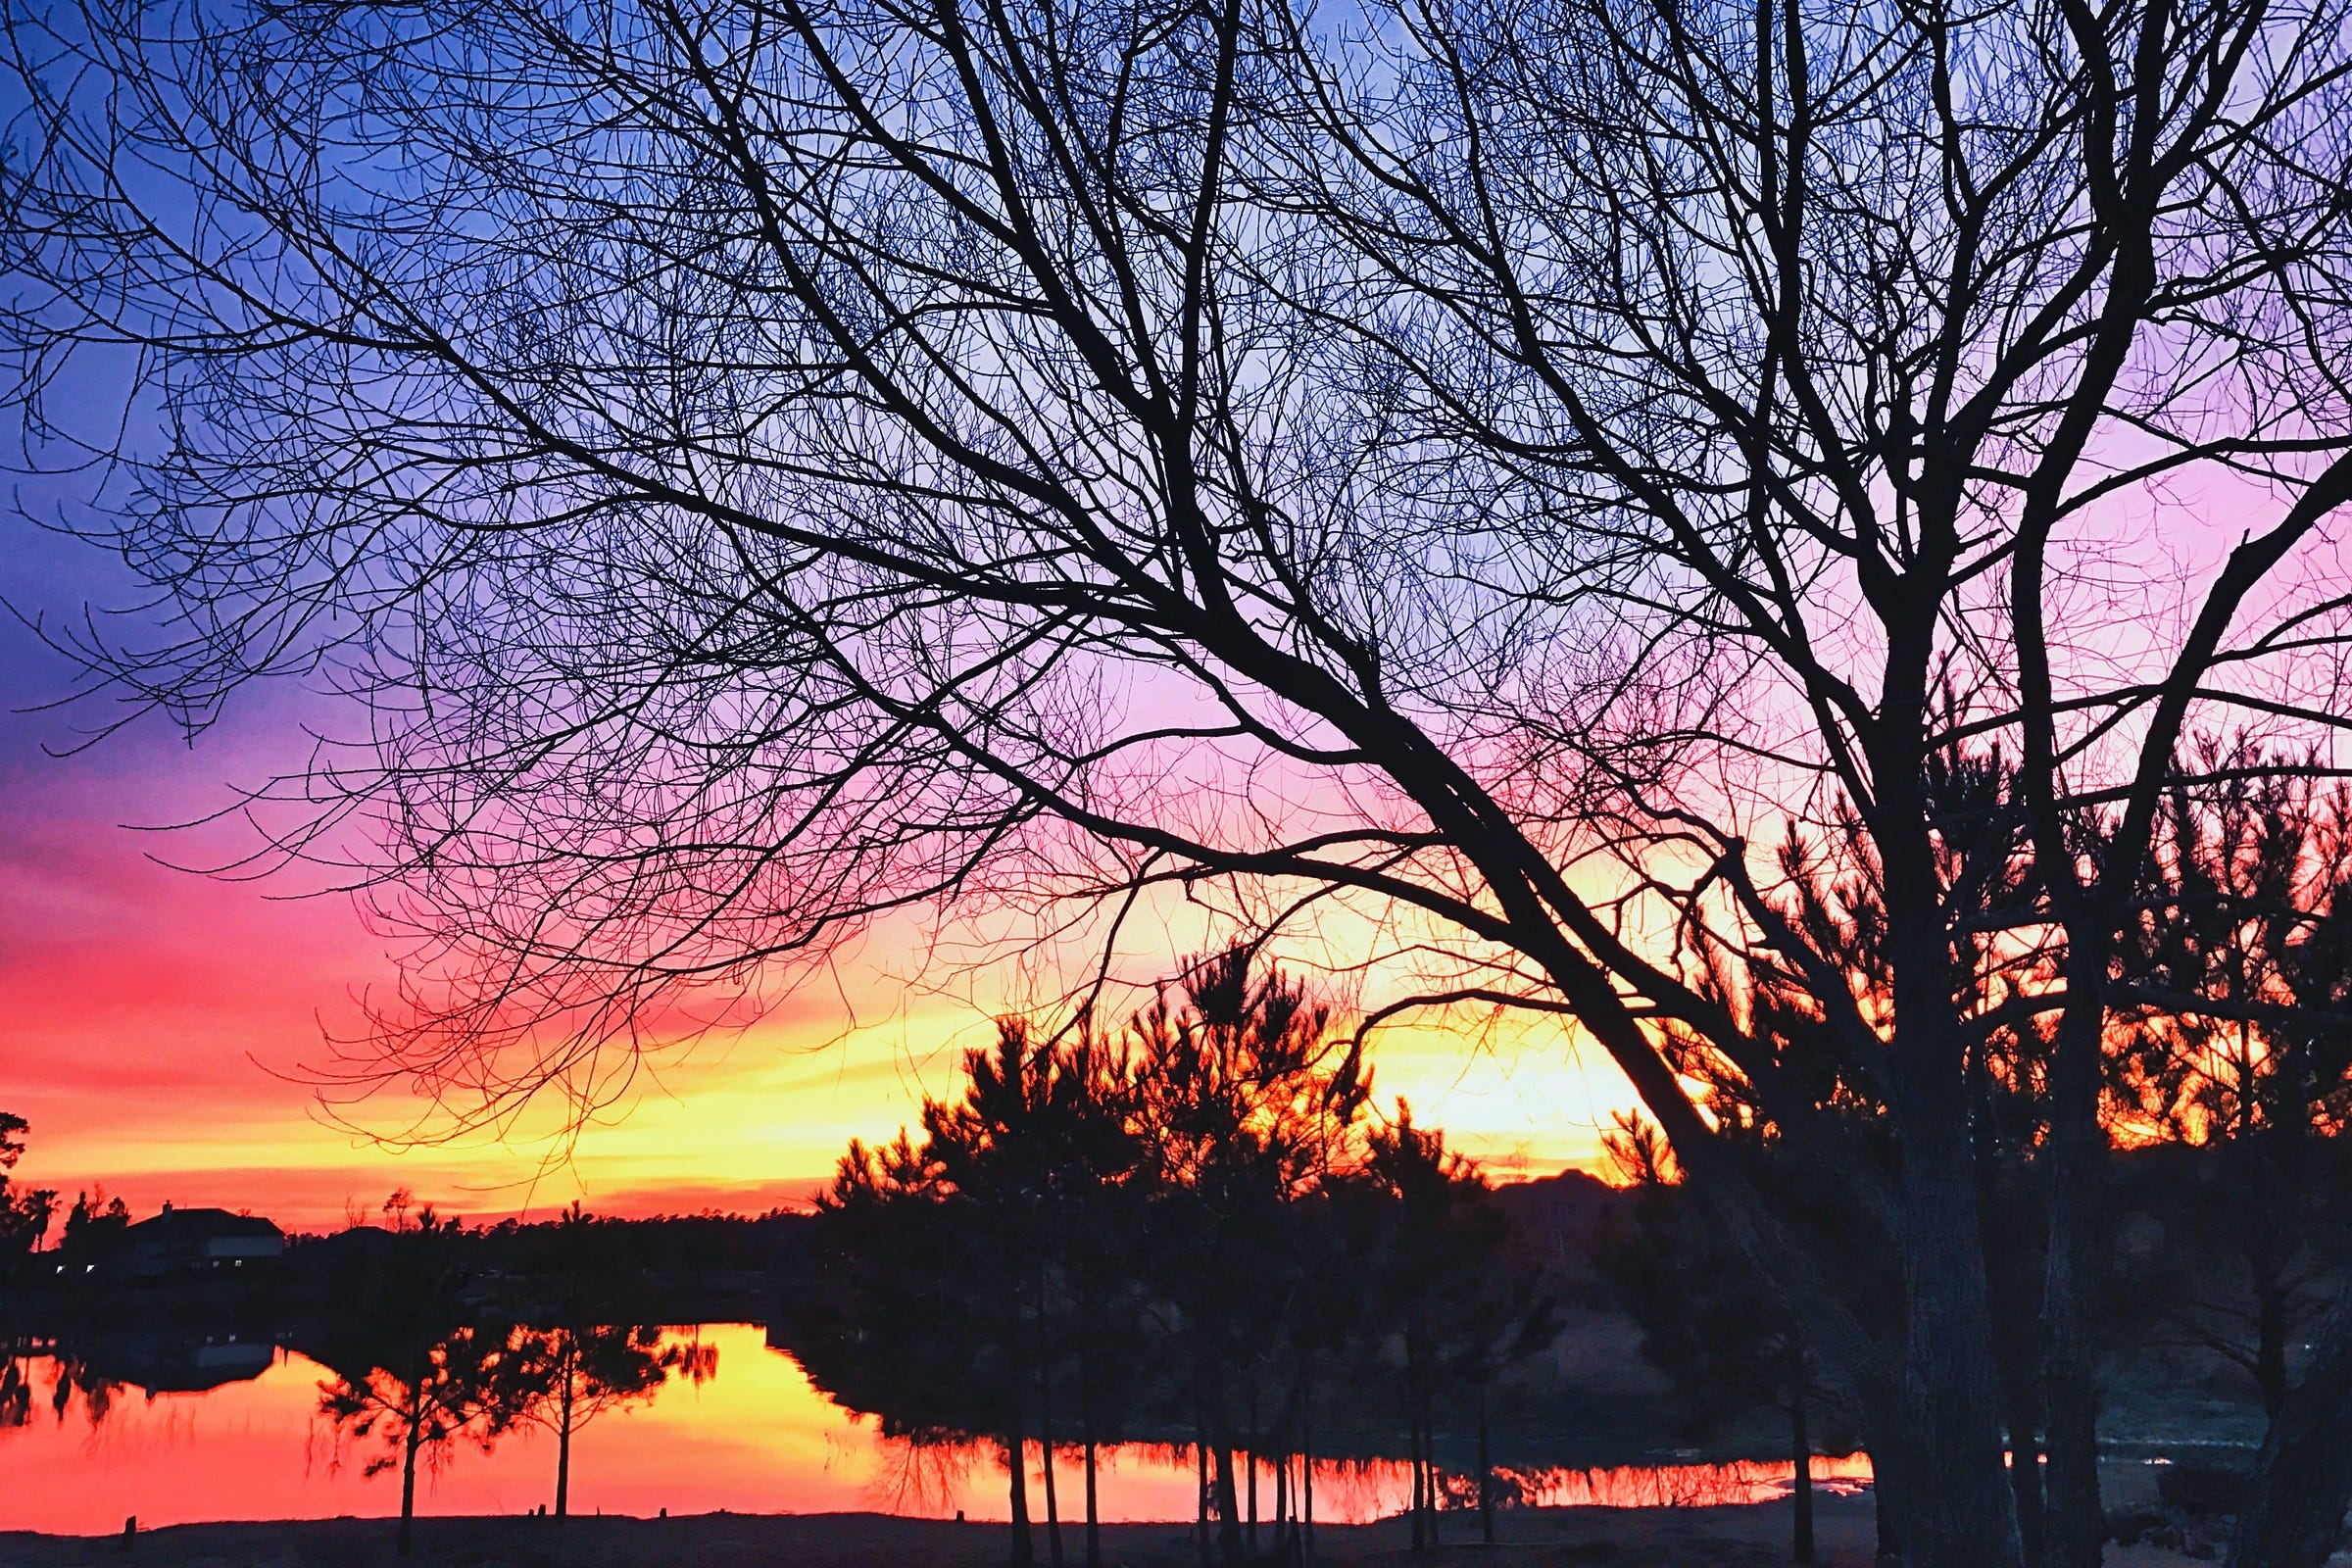 The sunset reflected in the lake; the sky changing from dark blue to orange, to yellow; trees shadowed on the shore and the bare branches of a willow tree stretch across the scene from right to left.